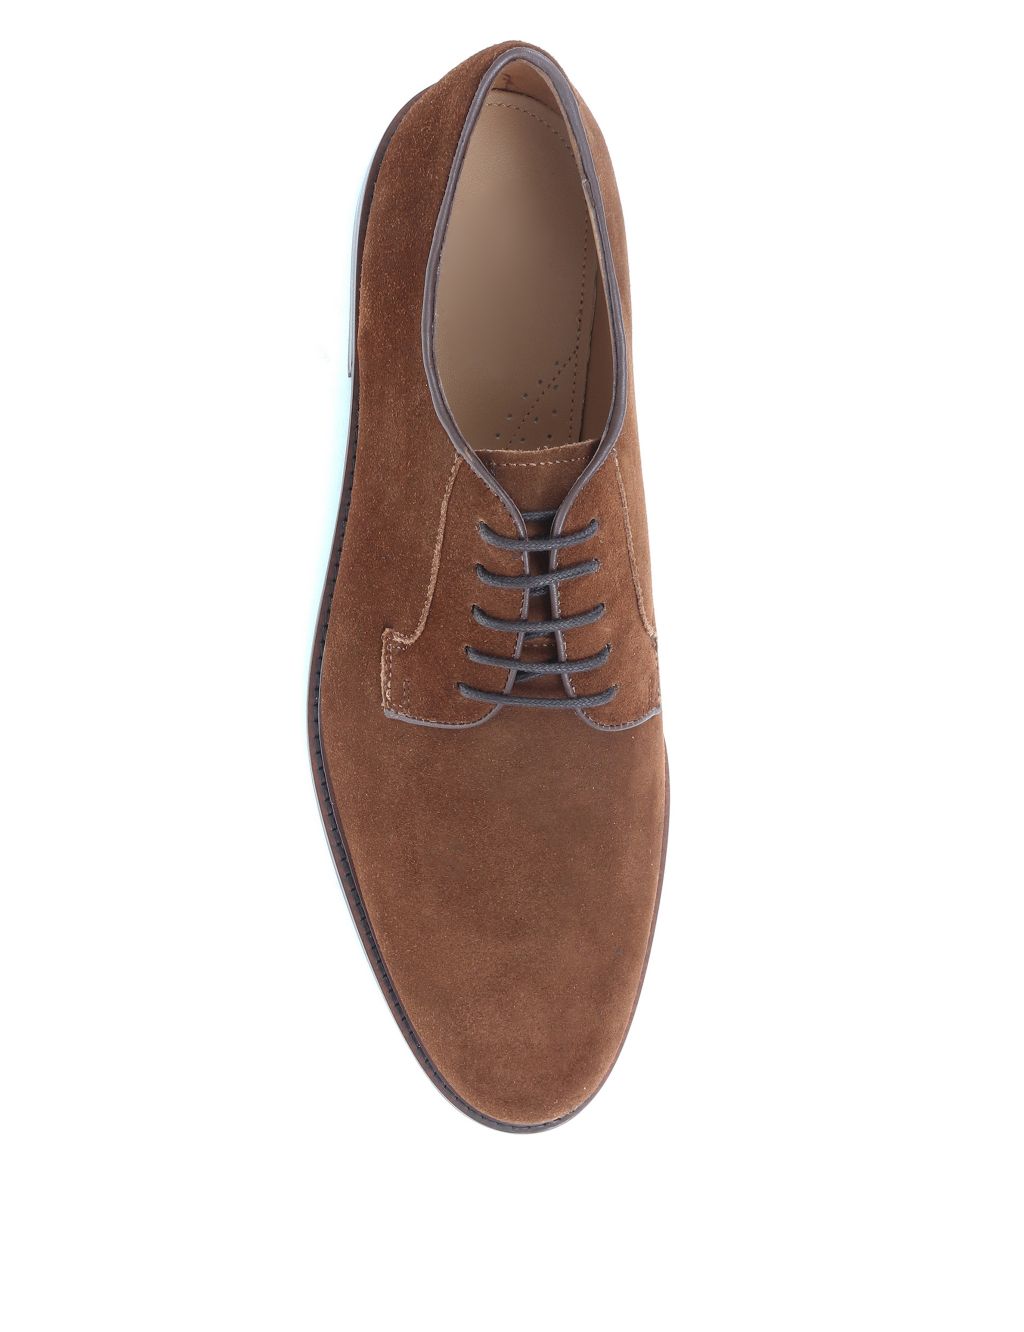 Leather Derby Shoes image 5